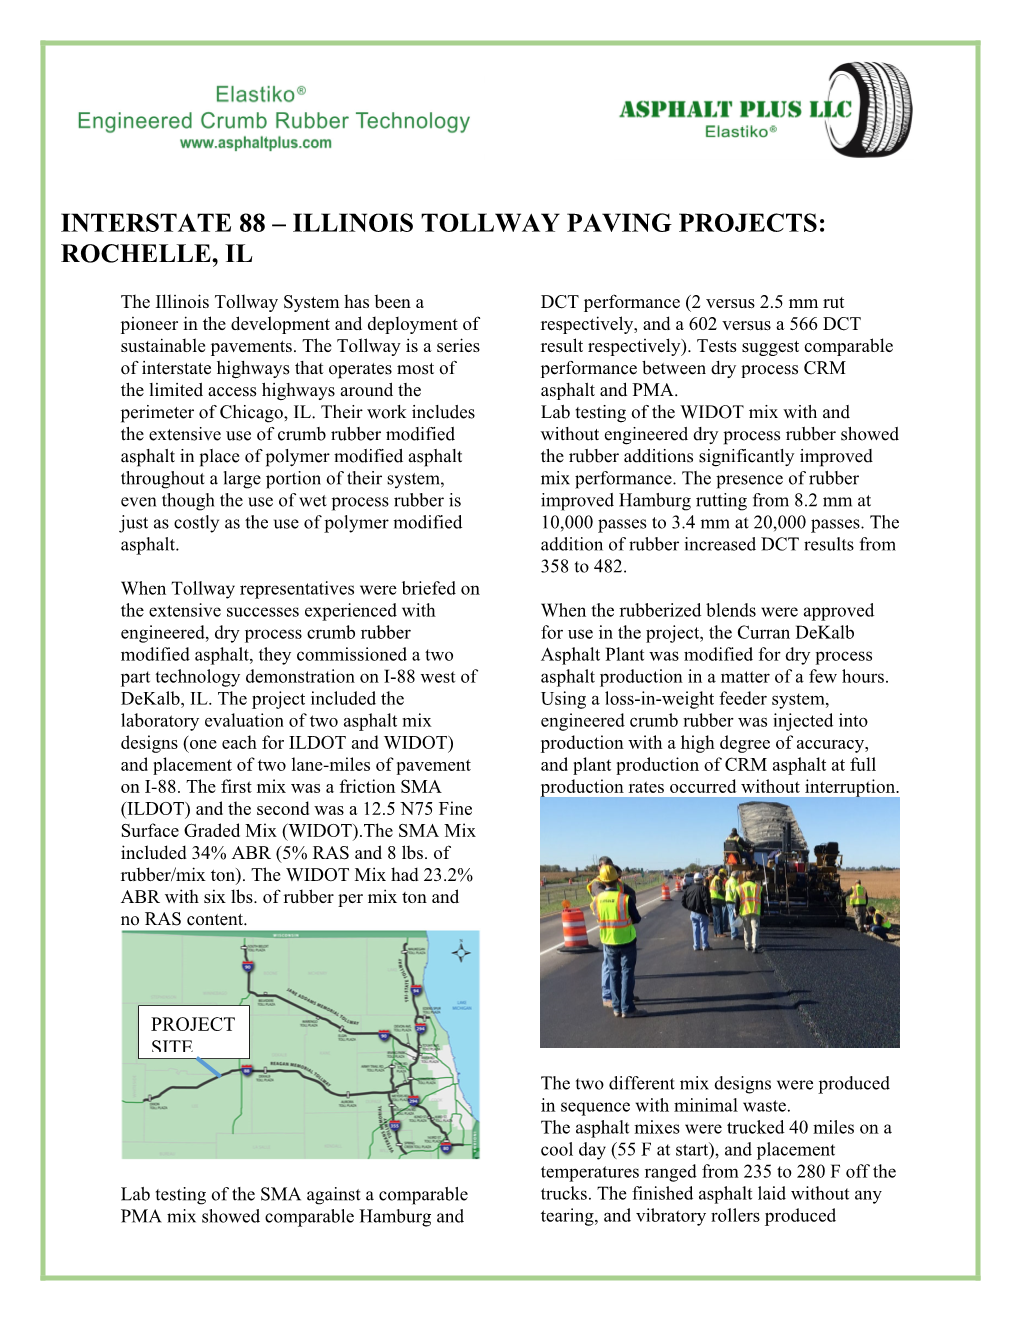 Interstate 88 – Illinois Tollway Paving Projects: Rochelle, Il